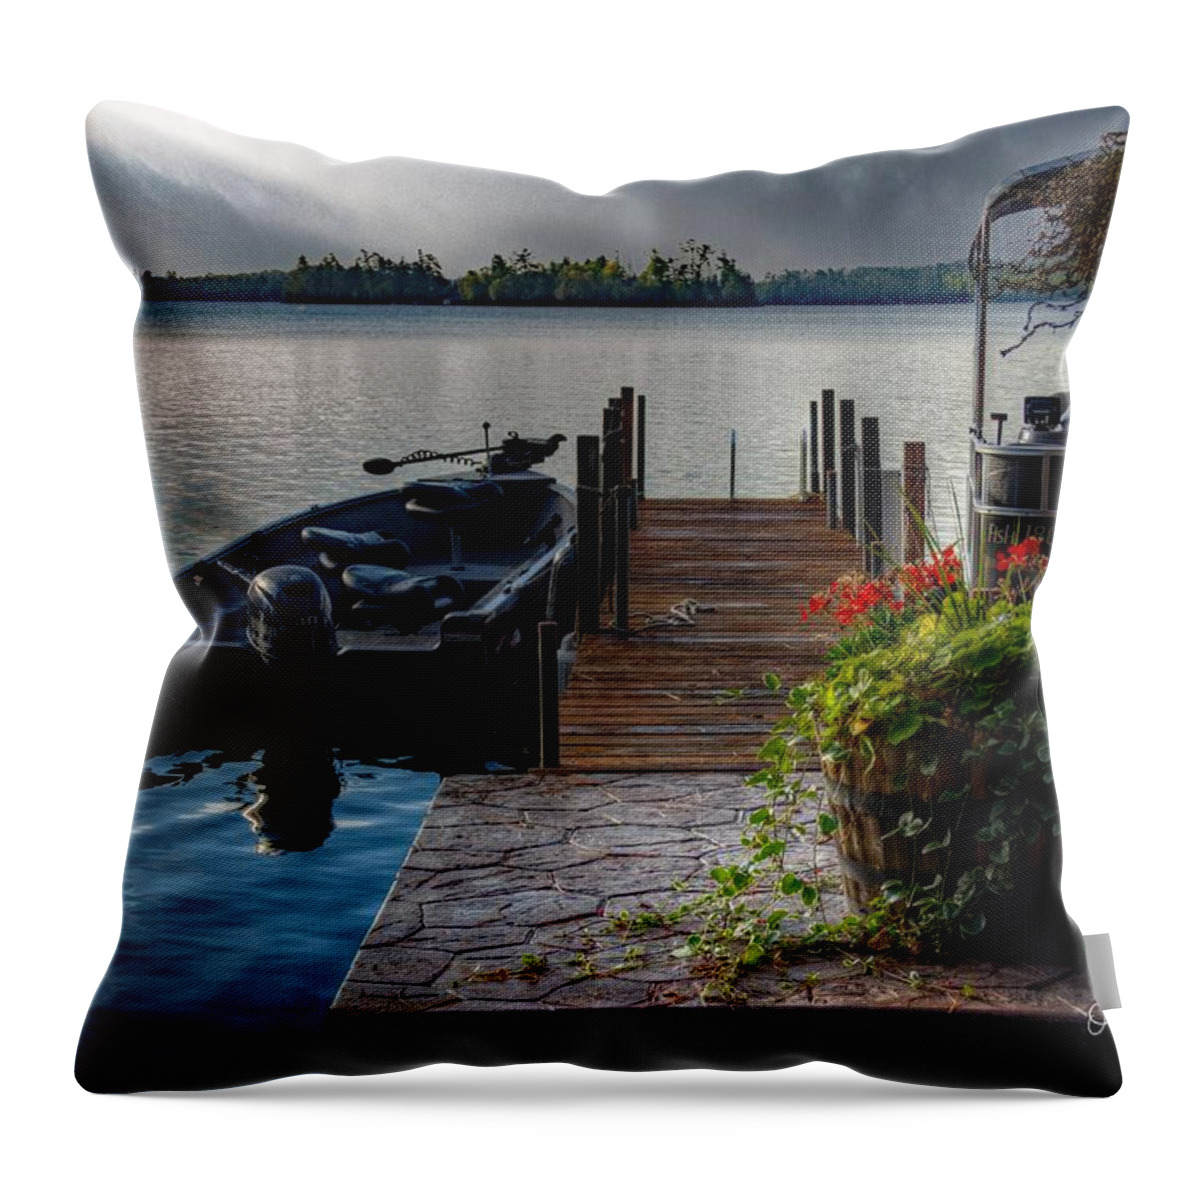 Minnesota Throw Pillow featuring the photograph Patience by Hans Brakob